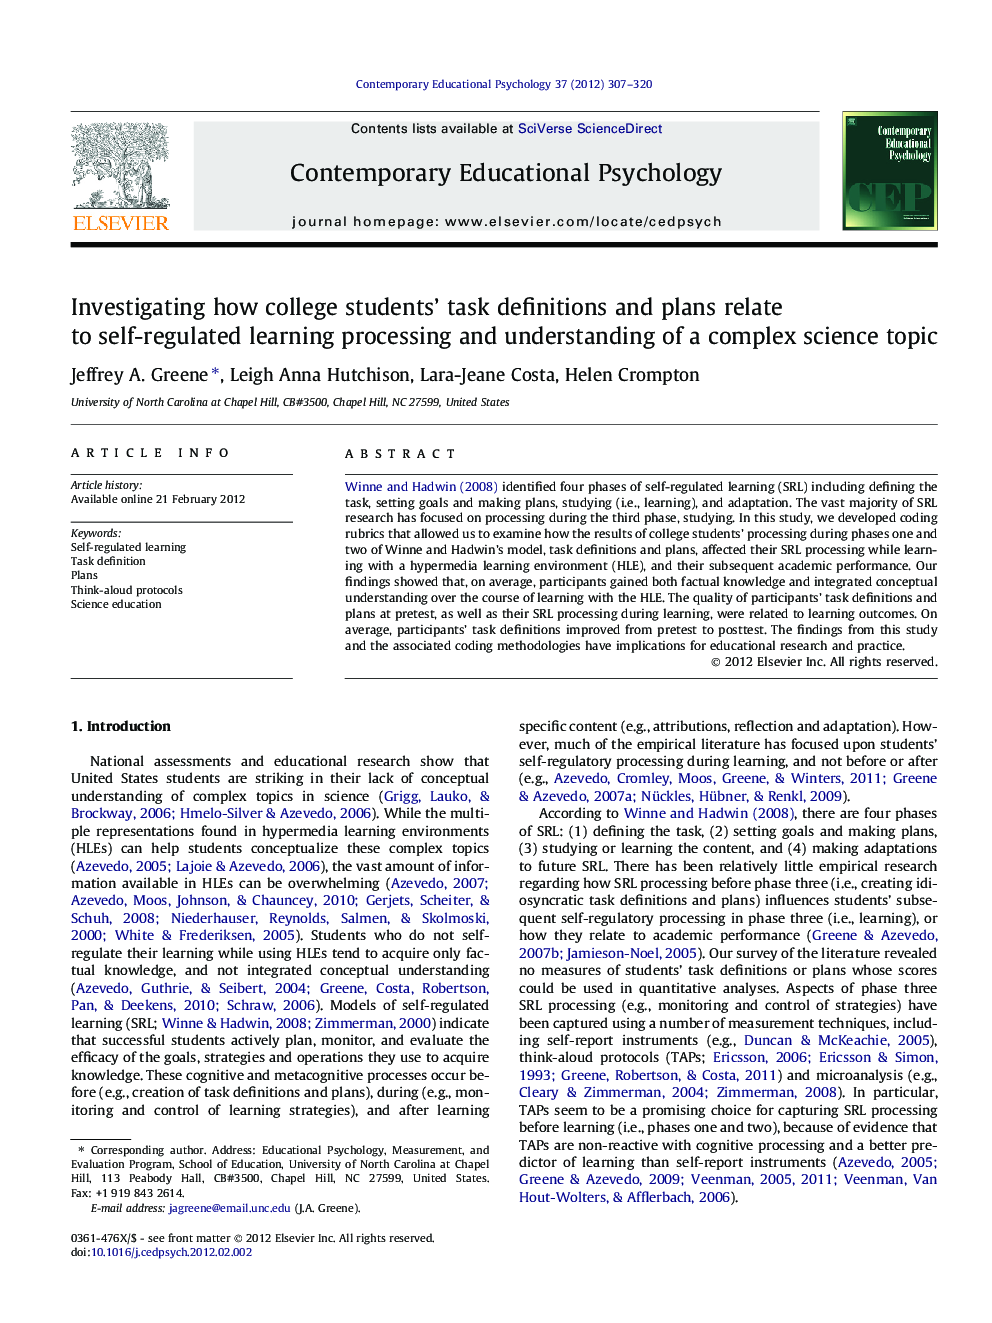 Investigating how college students’ task definitions and plans relate to self-regulated learning processing and understanding of a complex science topic